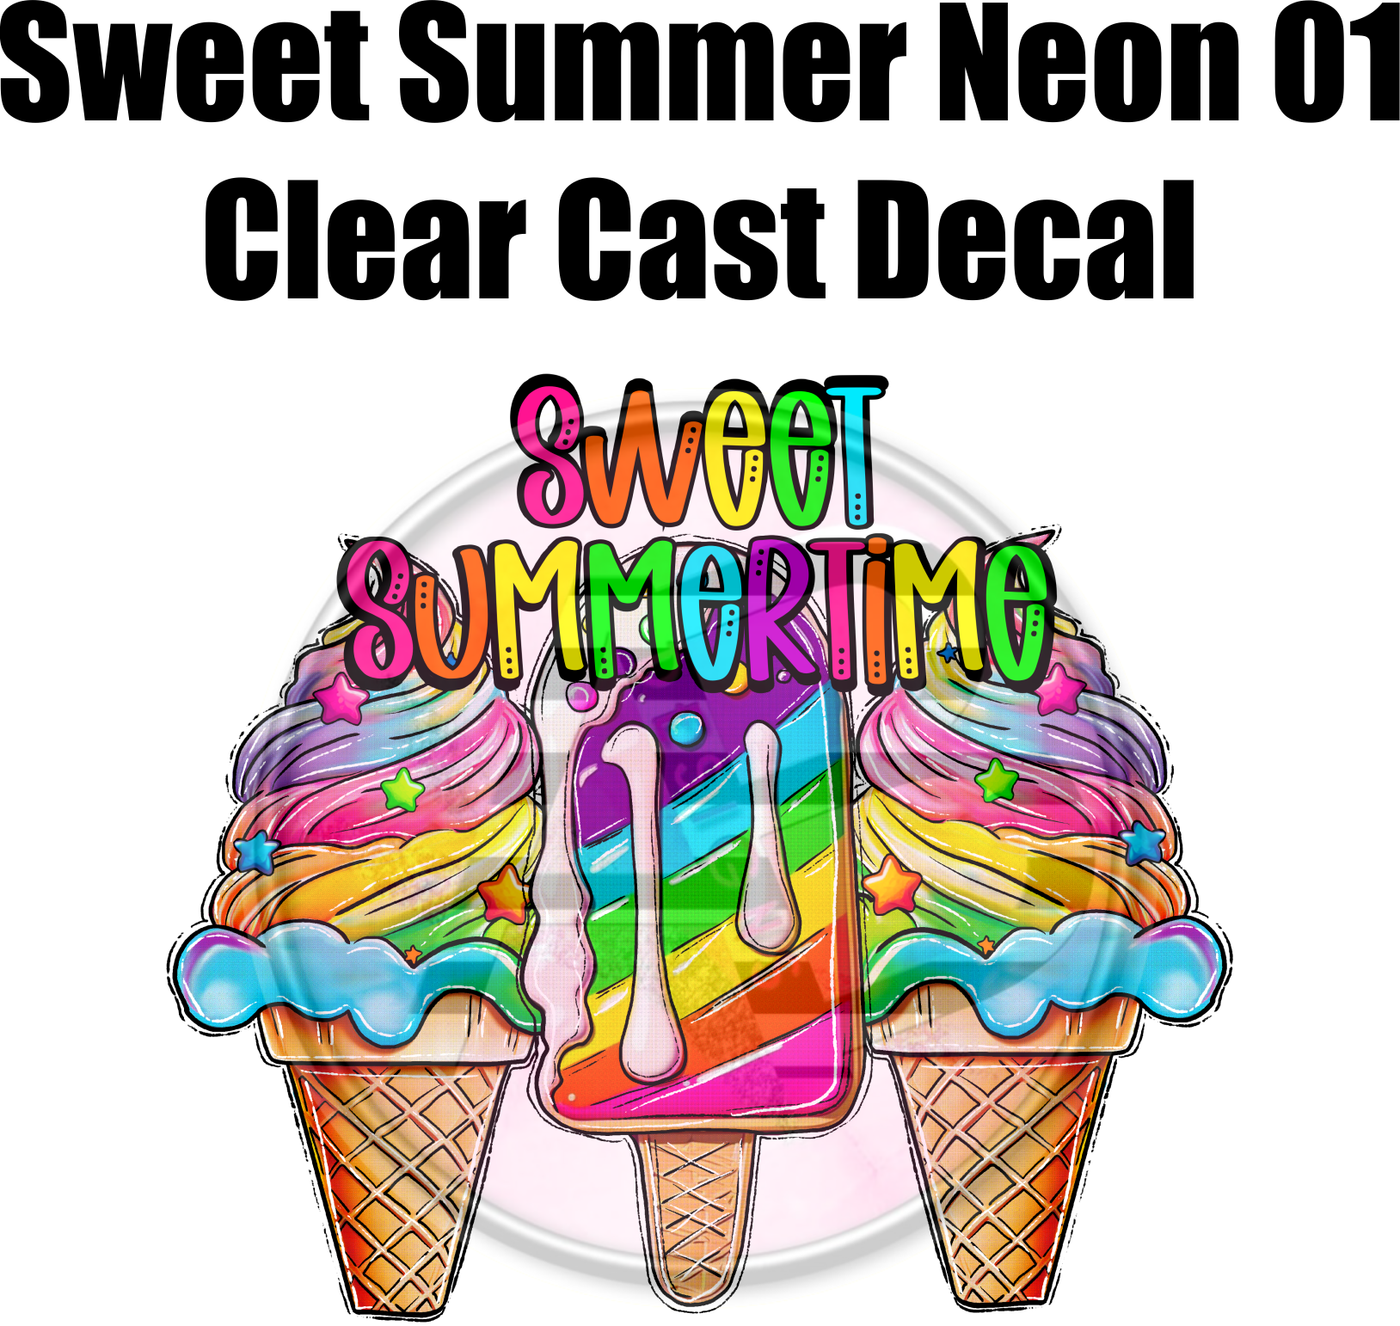 Sweet Summer Neon 01 - Clear Cast Decal - 111